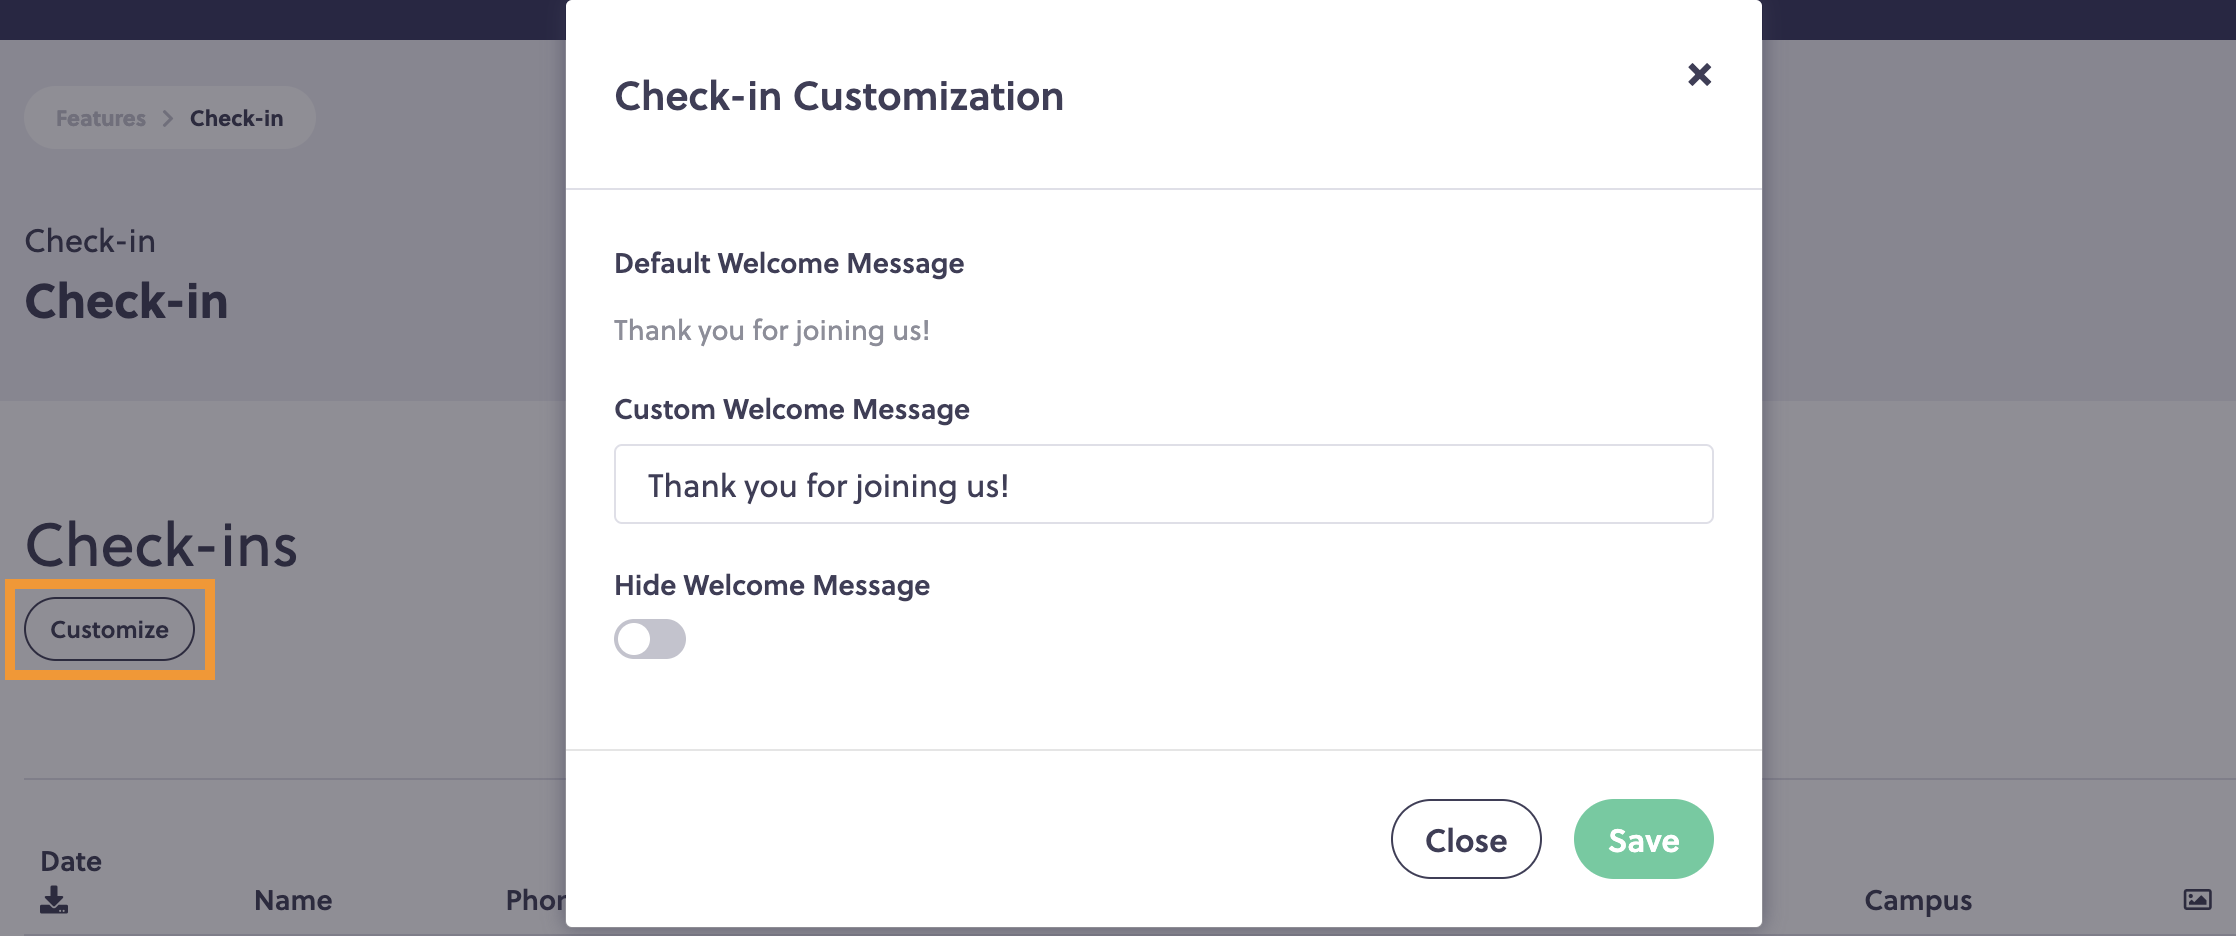 Check-In_Customization.png